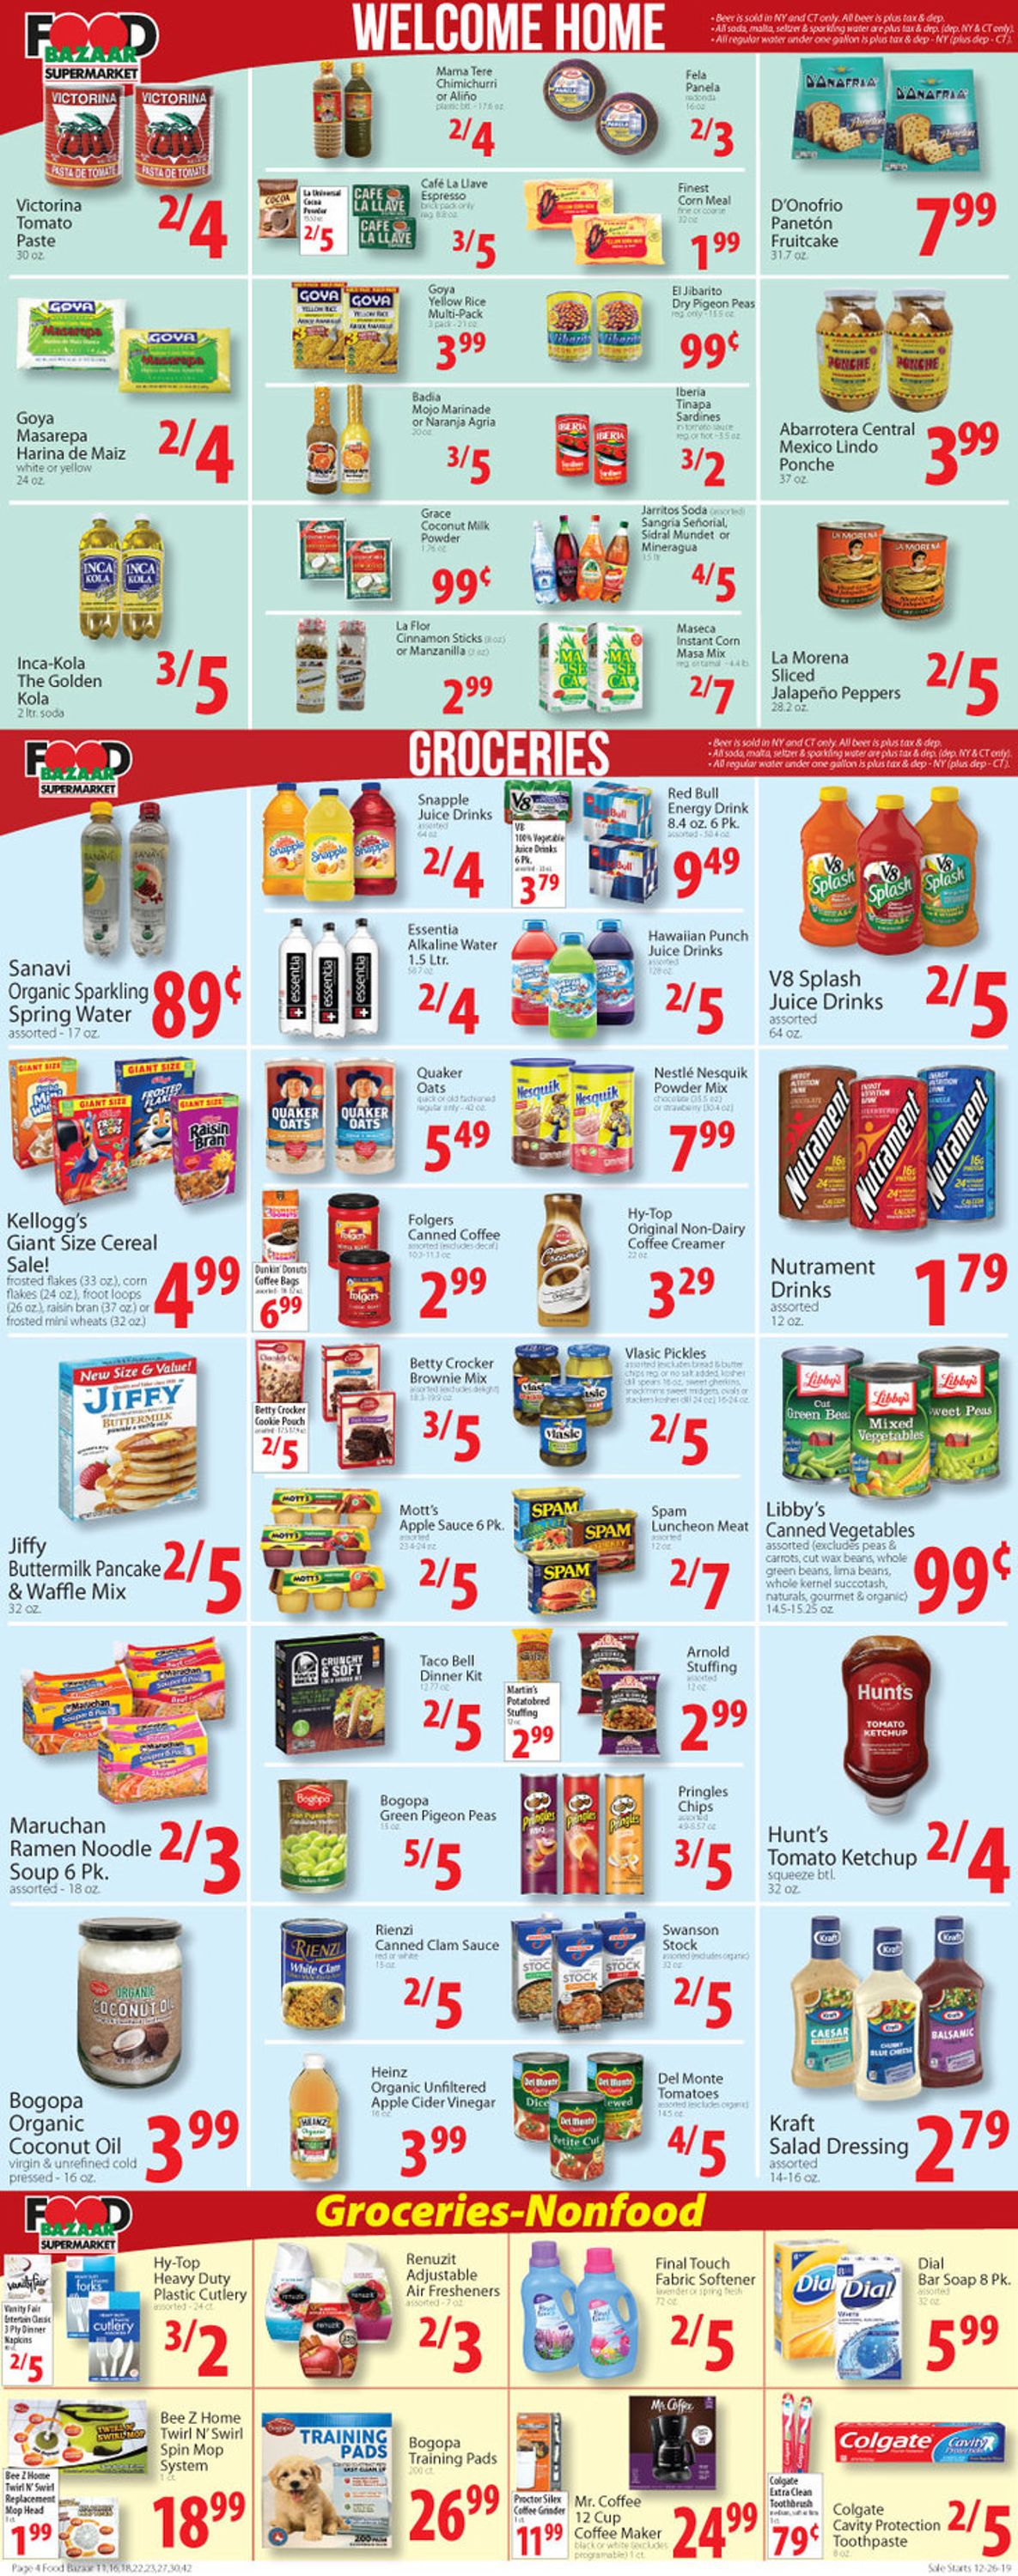 Catalogue Food Bazaar - New Year's Ad 2019/2020 from 12/26/2019